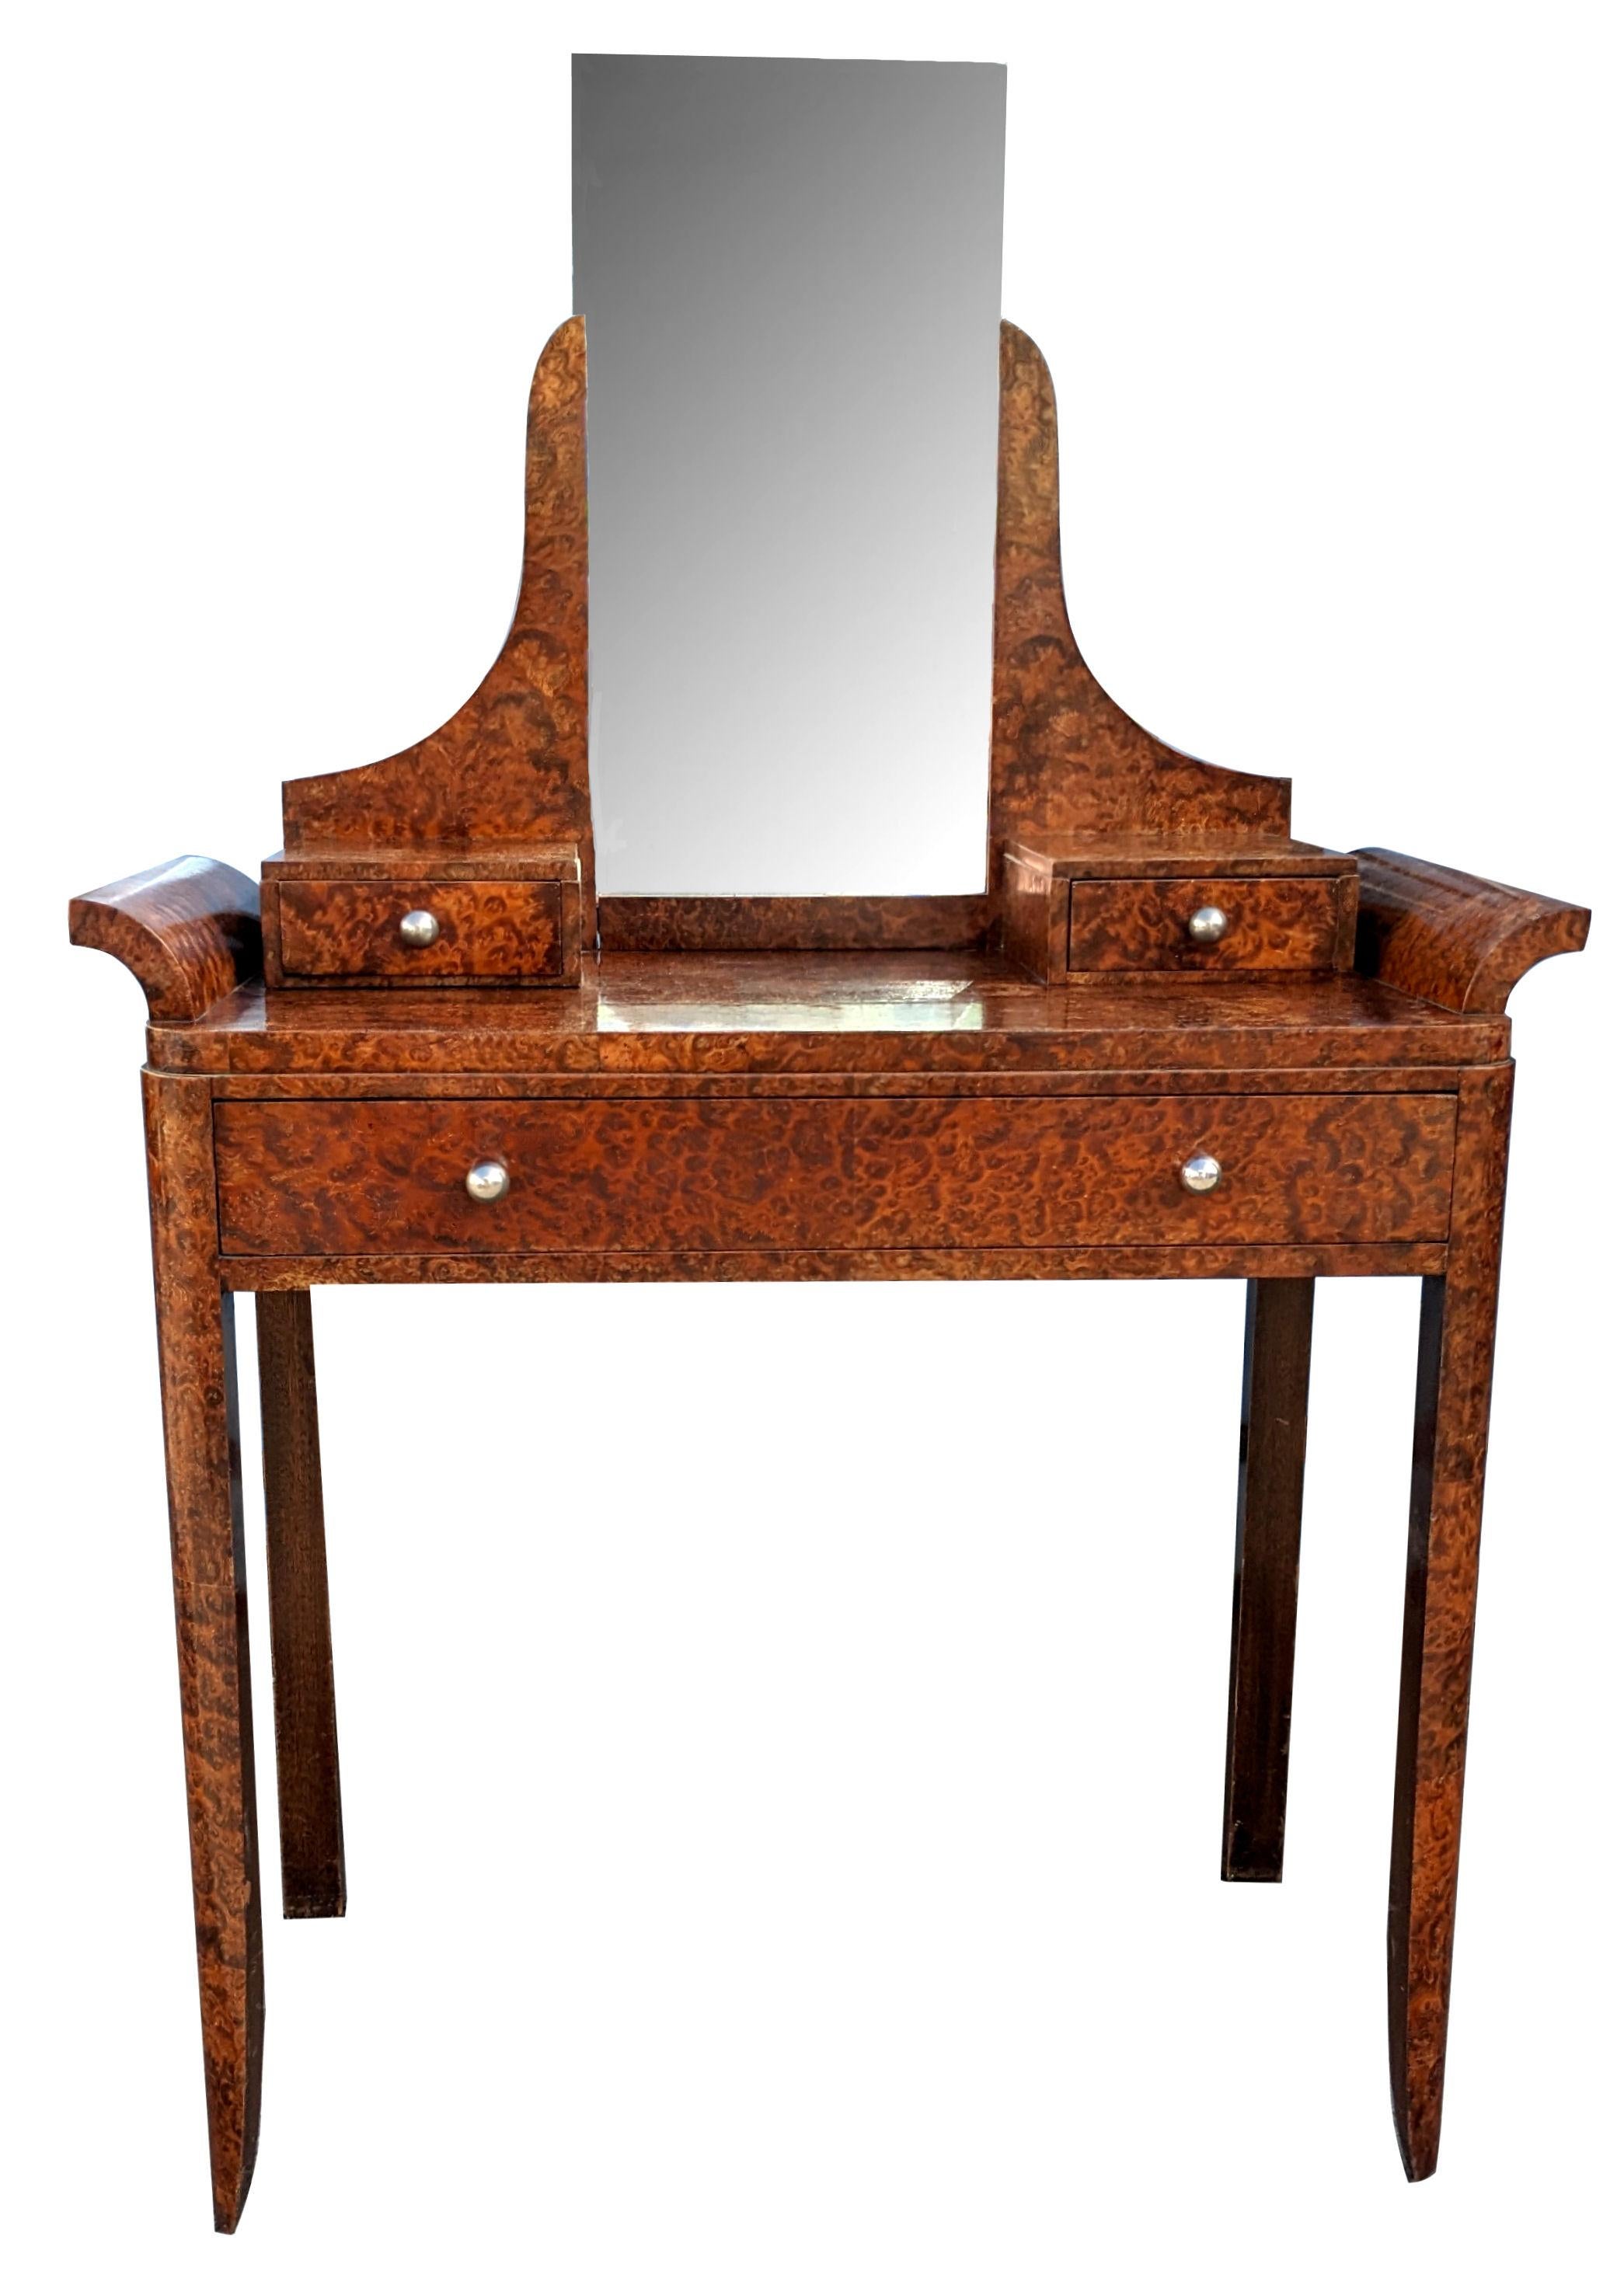 20th Century Art Deco Ladies Walnut Dressing Table Vanity, French, c1930 For Sale